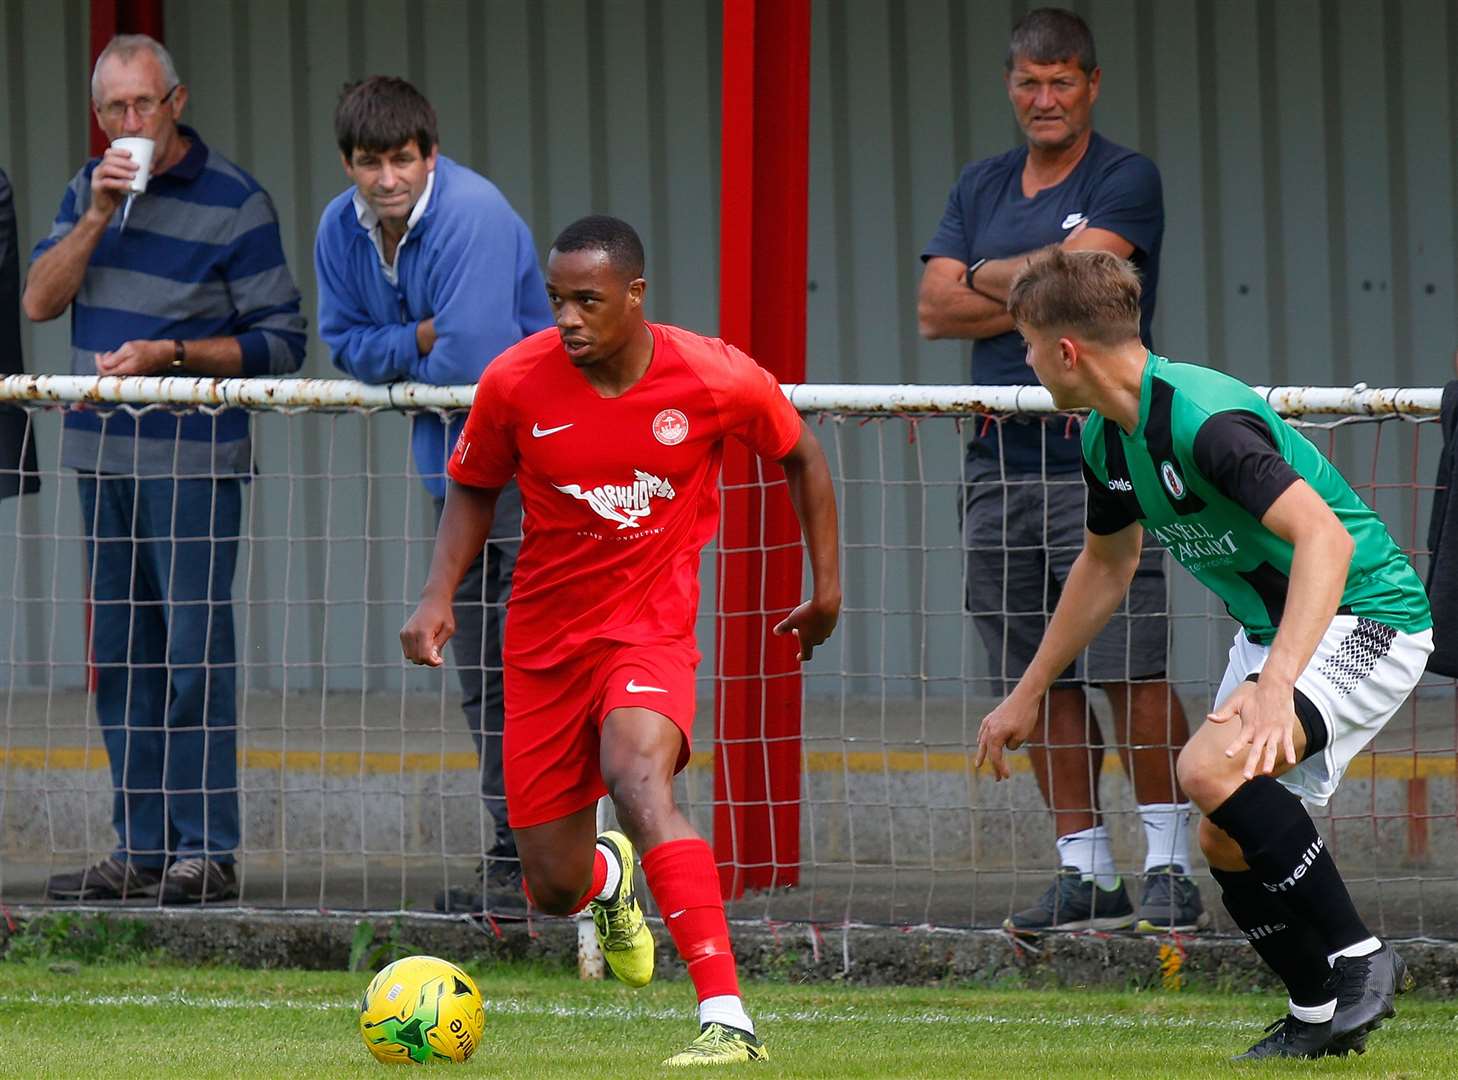 Hythe Town (red) - who play at step 4 - are one of the many football clubs that could potentially benefit from the Sports Winter Survival Package. Picture: Barry Goodwin (42328625)